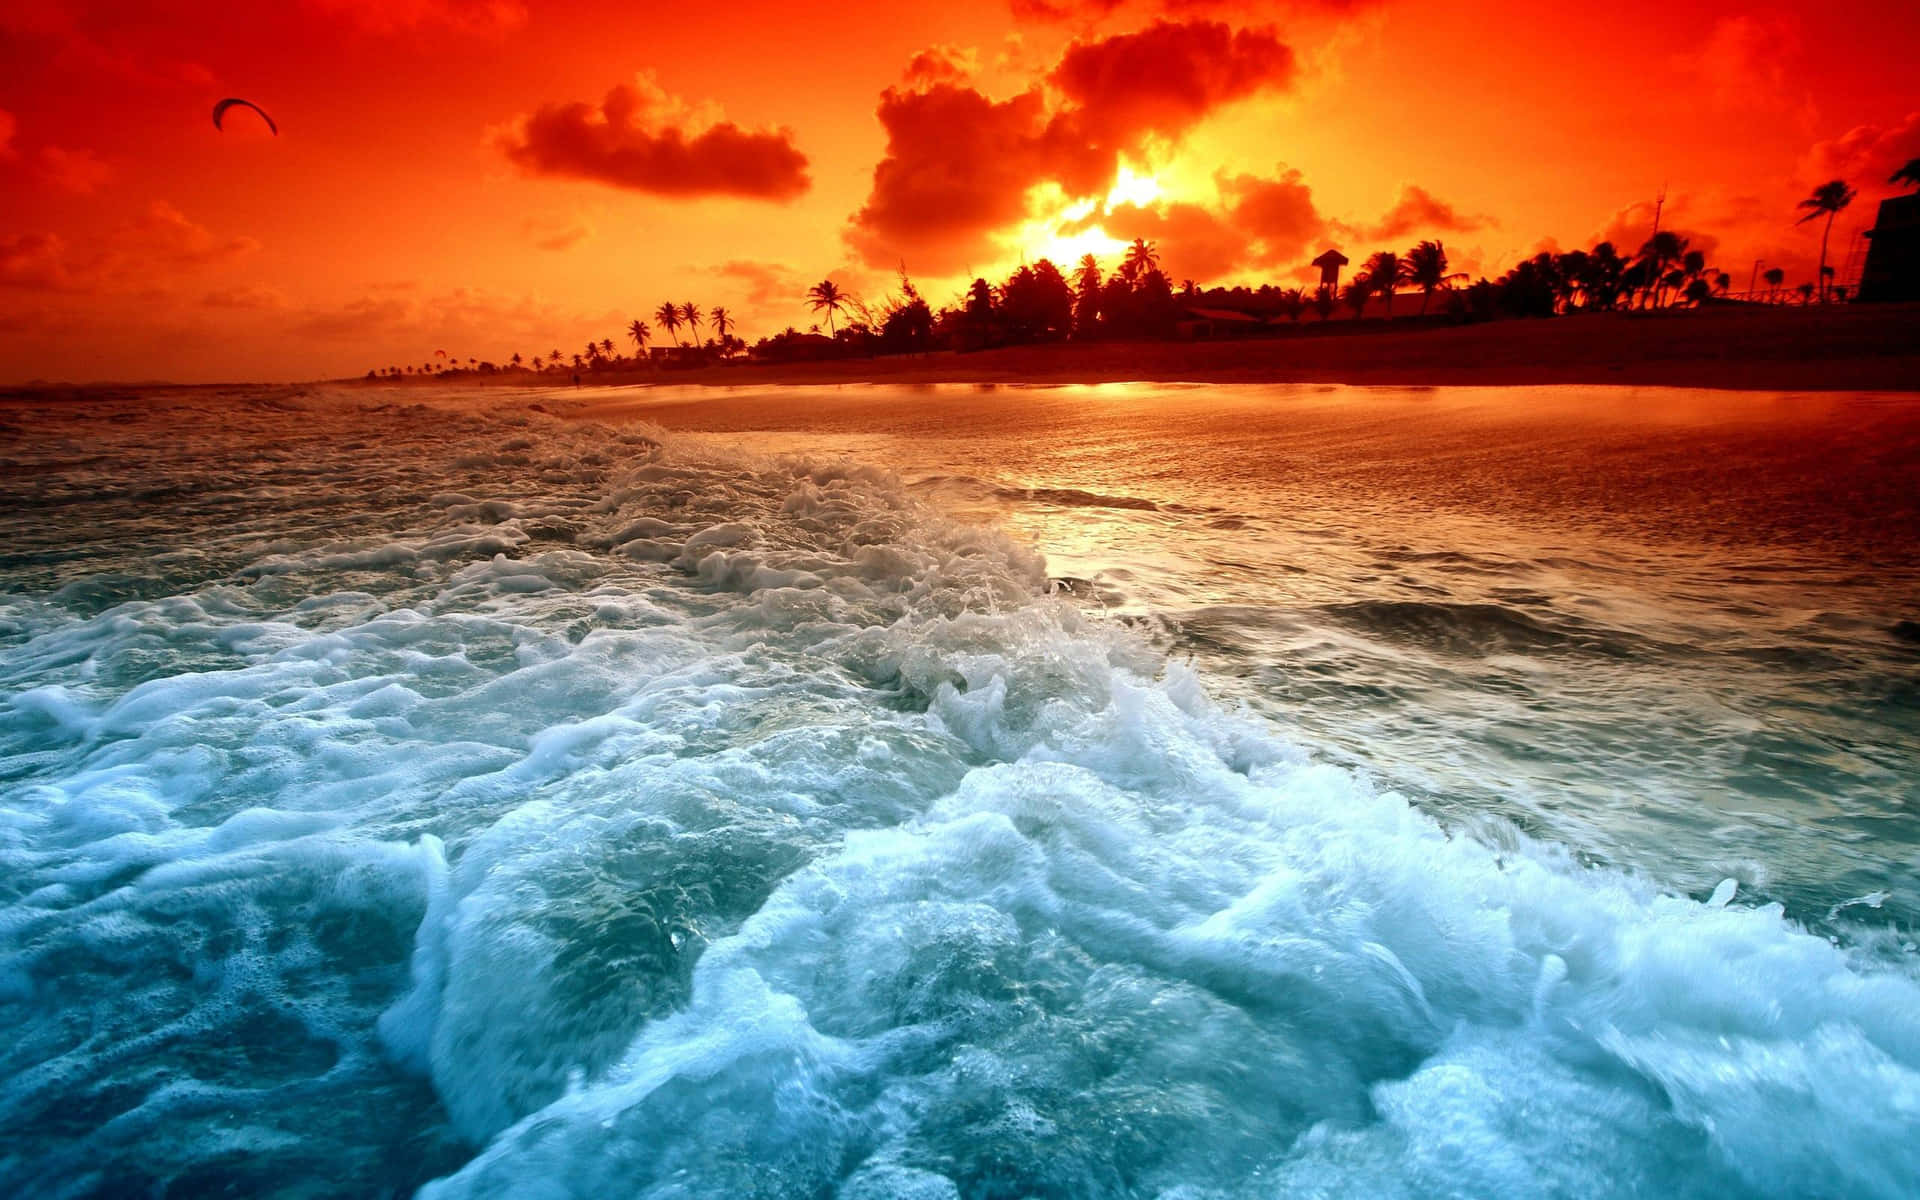 "Admiring the beauty of a shining sunset wave" Wallpaper